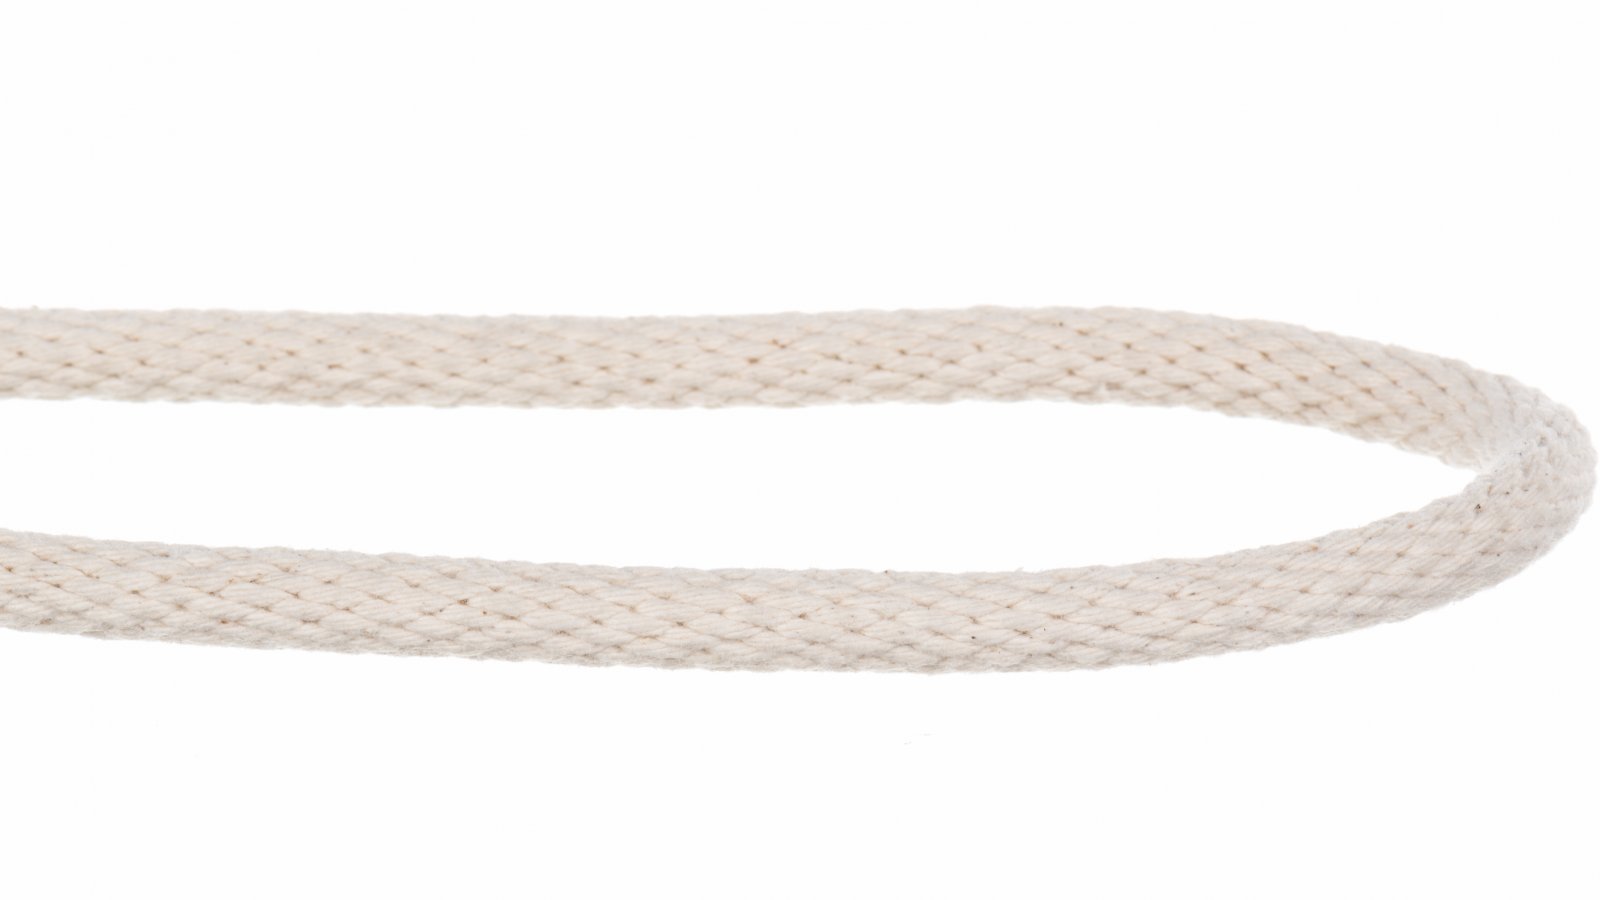 Cotton Solid Braid (100% Cotton) ropes - Lowest prices, free shipping